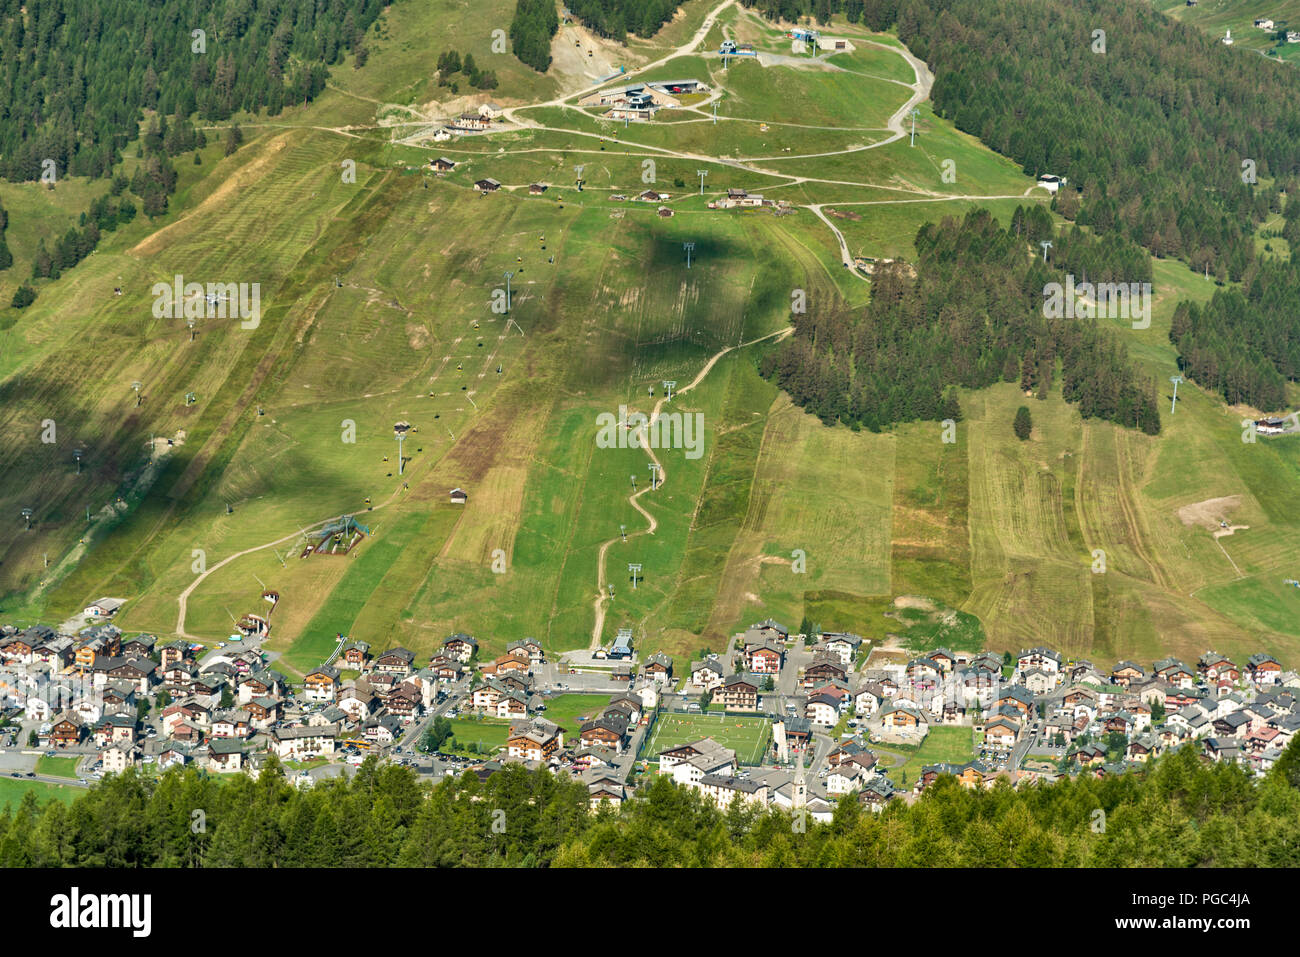 Aerial view of the ski resort of Livigno in the Italian alps, Lombardy nestling in a lushgreen valley viewed from a steep mountain peak Stock Photo